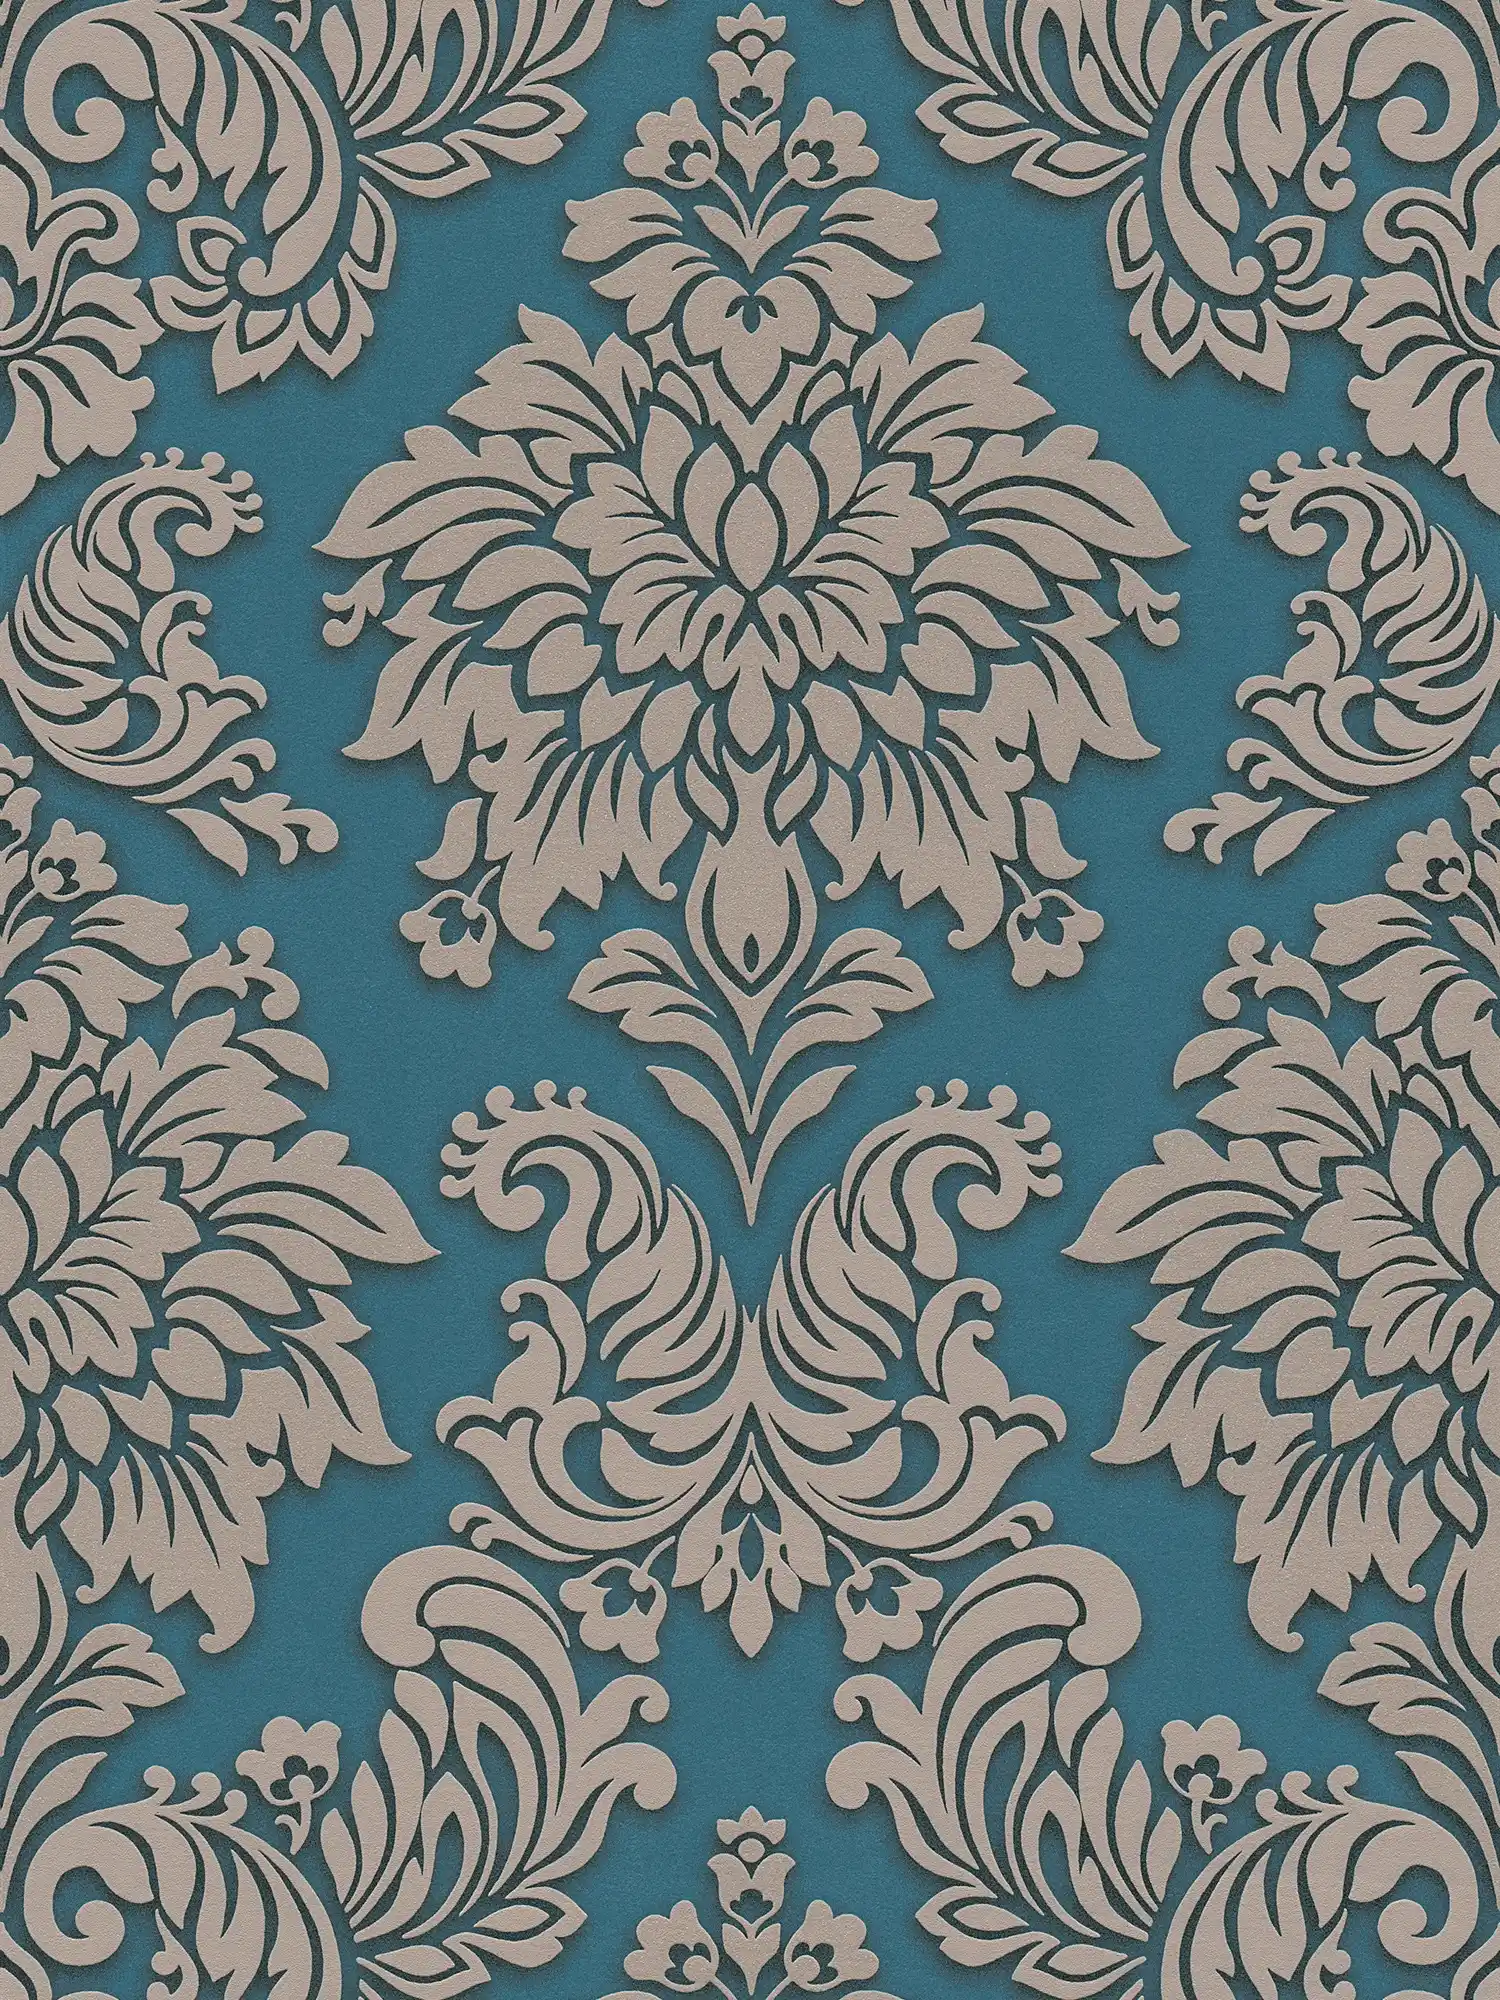 Baroque wallpaper ornaments with glitter effect - blue, silver, beige
